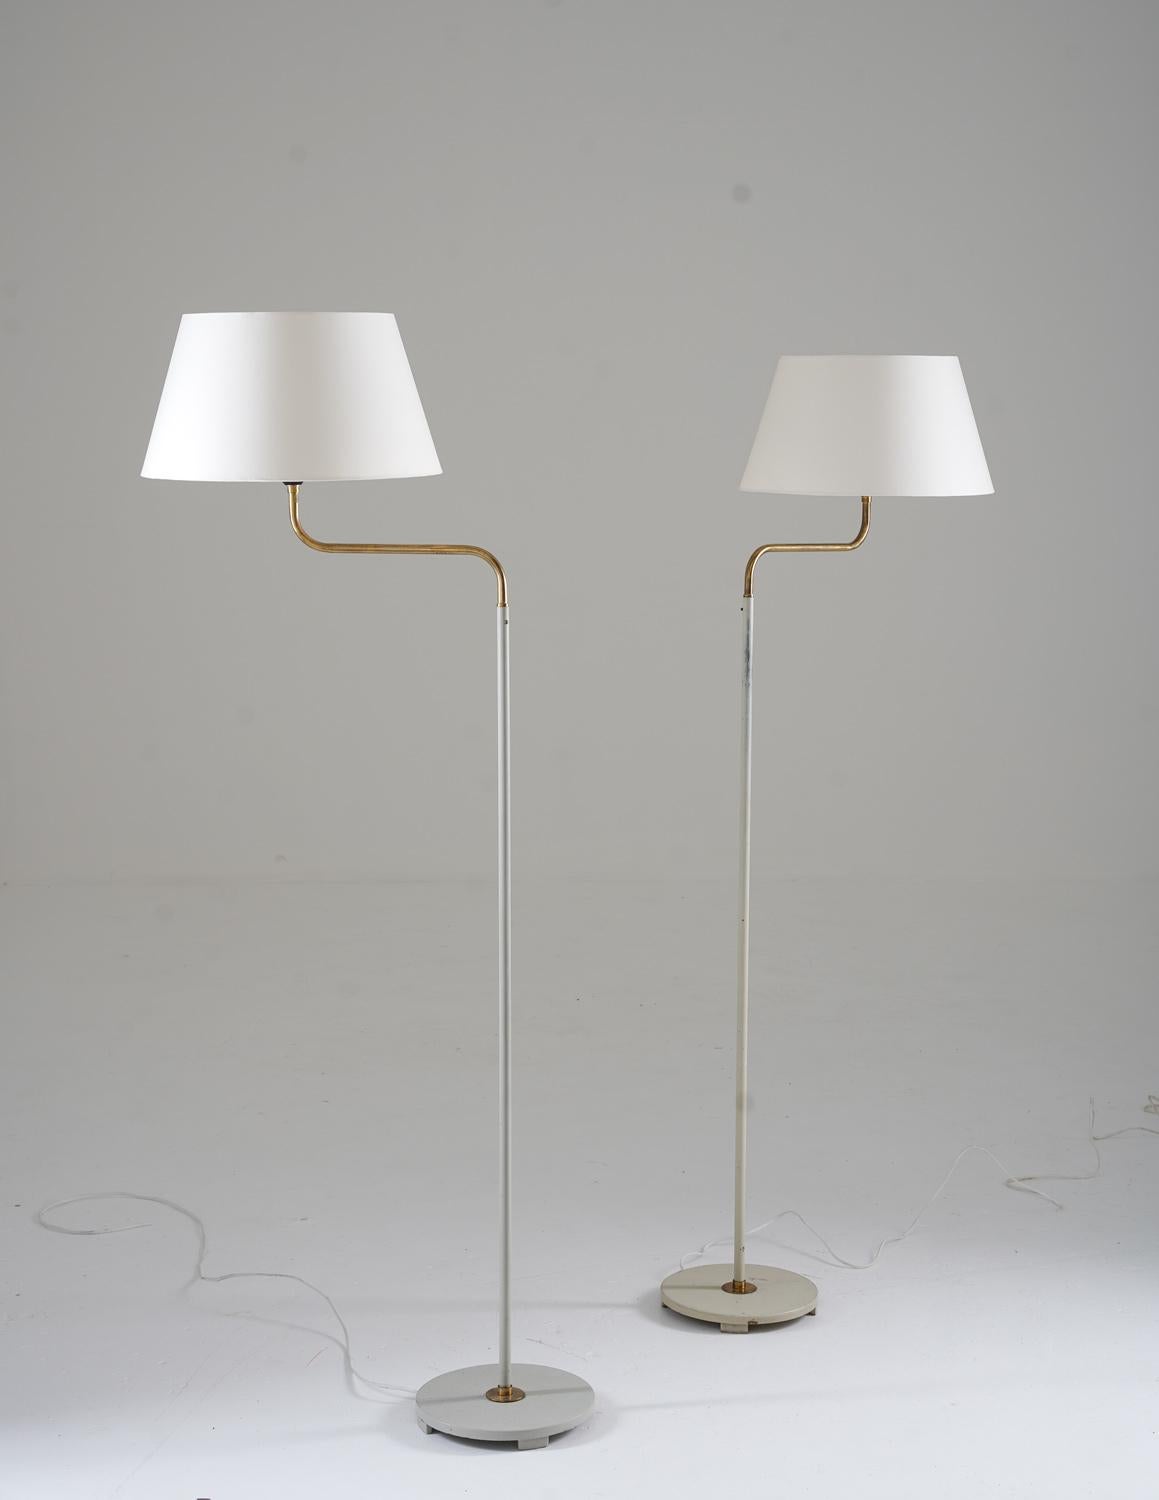 This beautiful set of floor lamps, manufactured by the renowned ASEA company during the 1950s, is a versatile and stylish addition to any room. The design of these lamps is truly striking, featuring a sleek and sophisticated combination of metal and